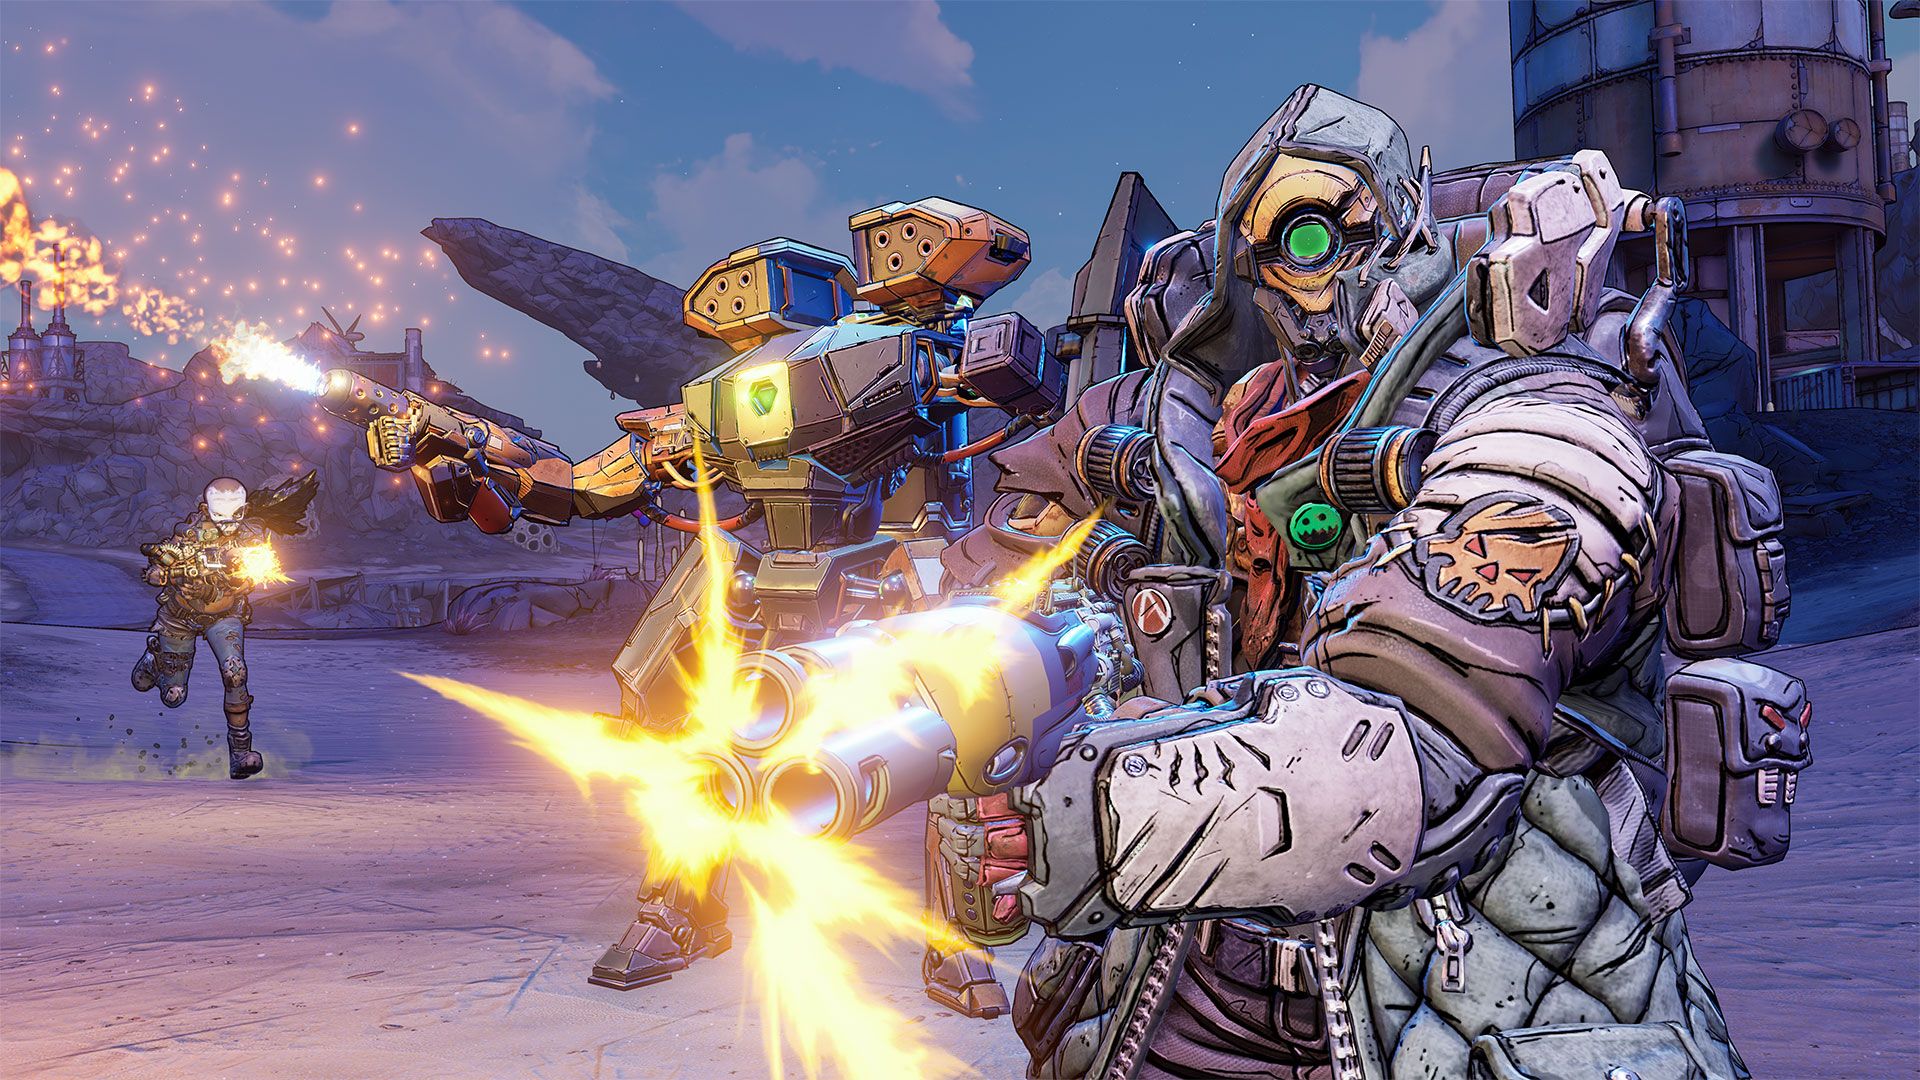 Borderlands 3 gets more DLC “later this year”, with new skill trees and